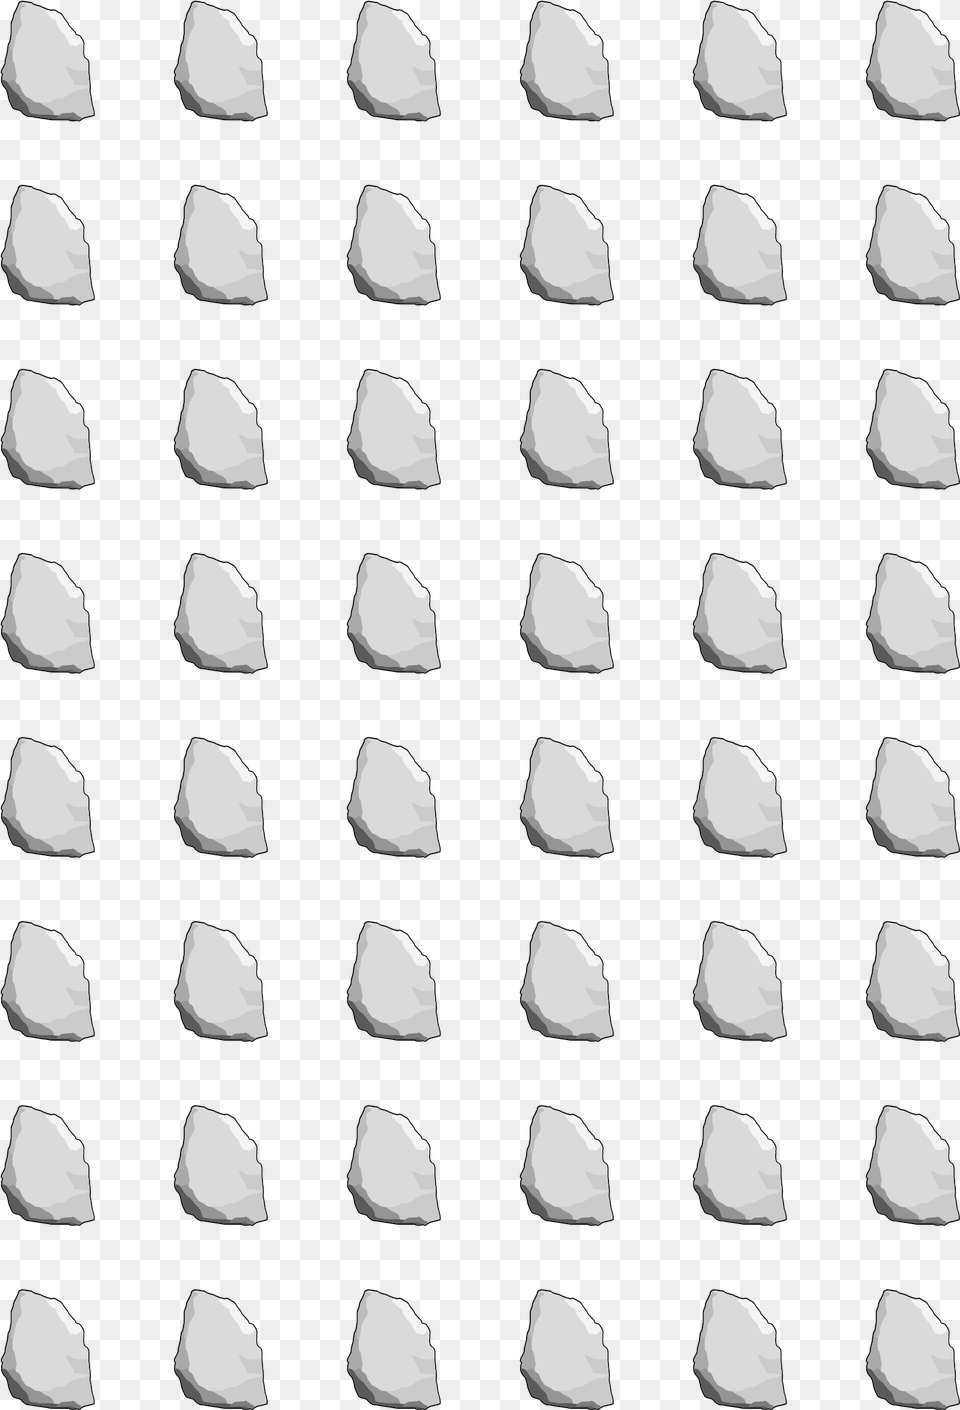 This Free Icons Design Of A4 Sheet Of Stones Without, Pattern, Texture, Home Decor Png